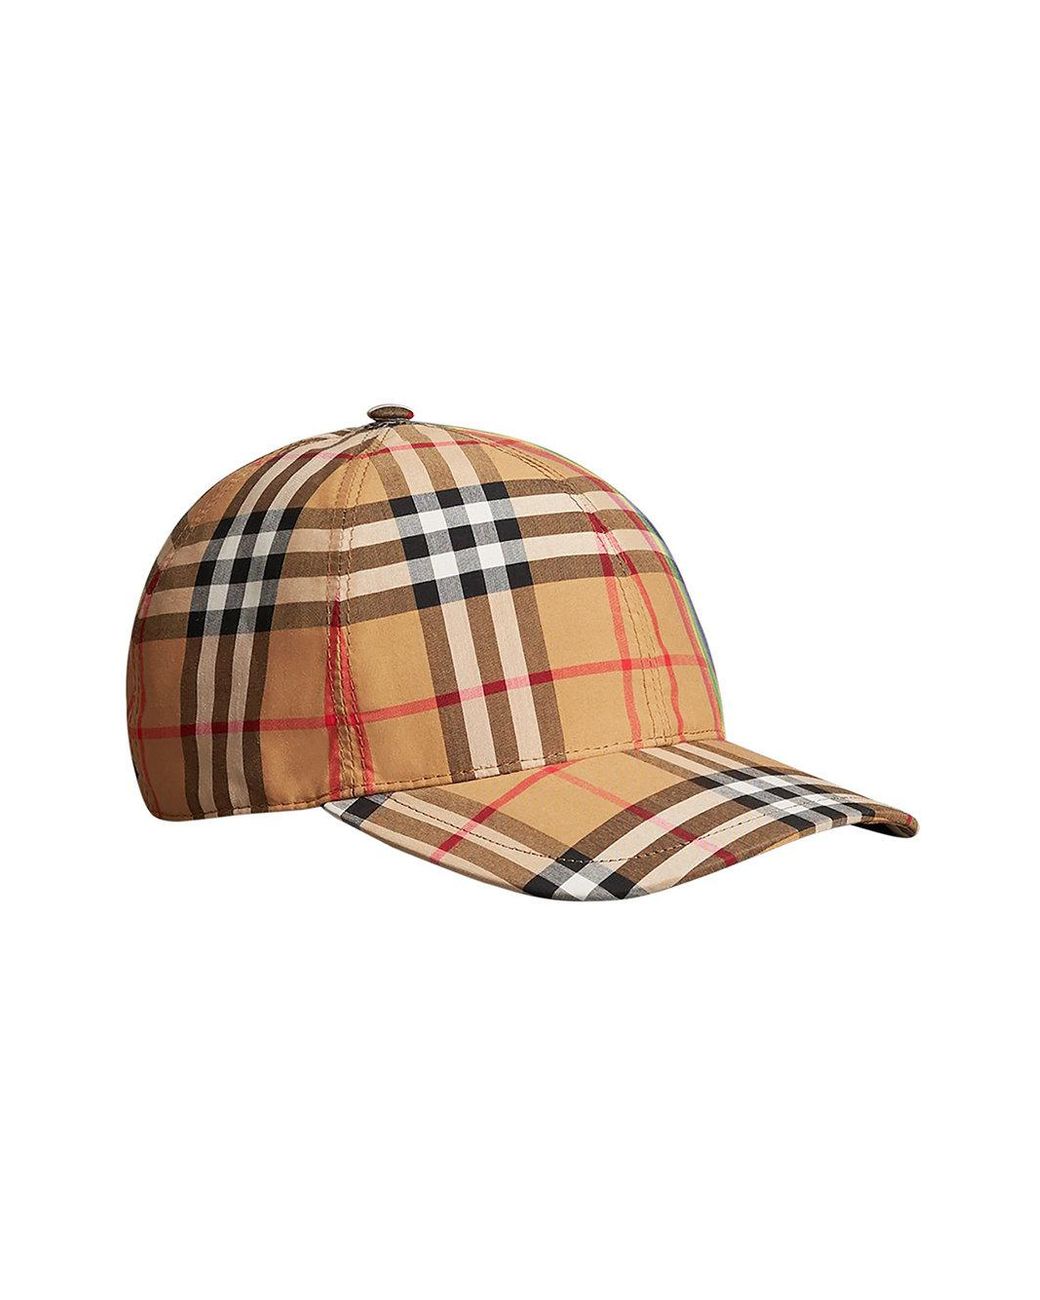 Burberry Rainbow Vintage Check Baseball Cap in Brown | Lyst